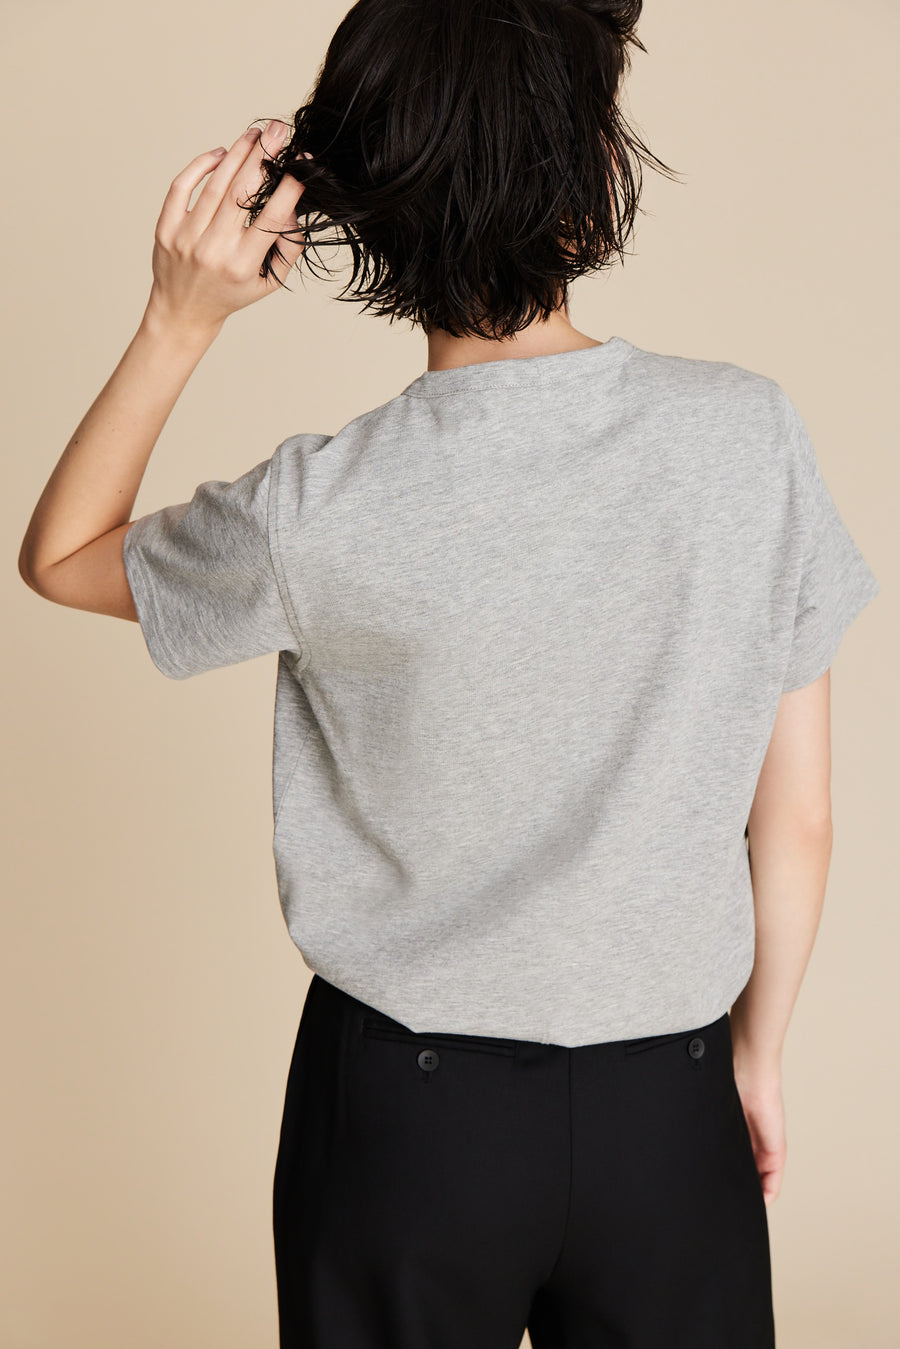 The Iconically Soft Perfect Tee – in Grey Heather Sold NYC Out